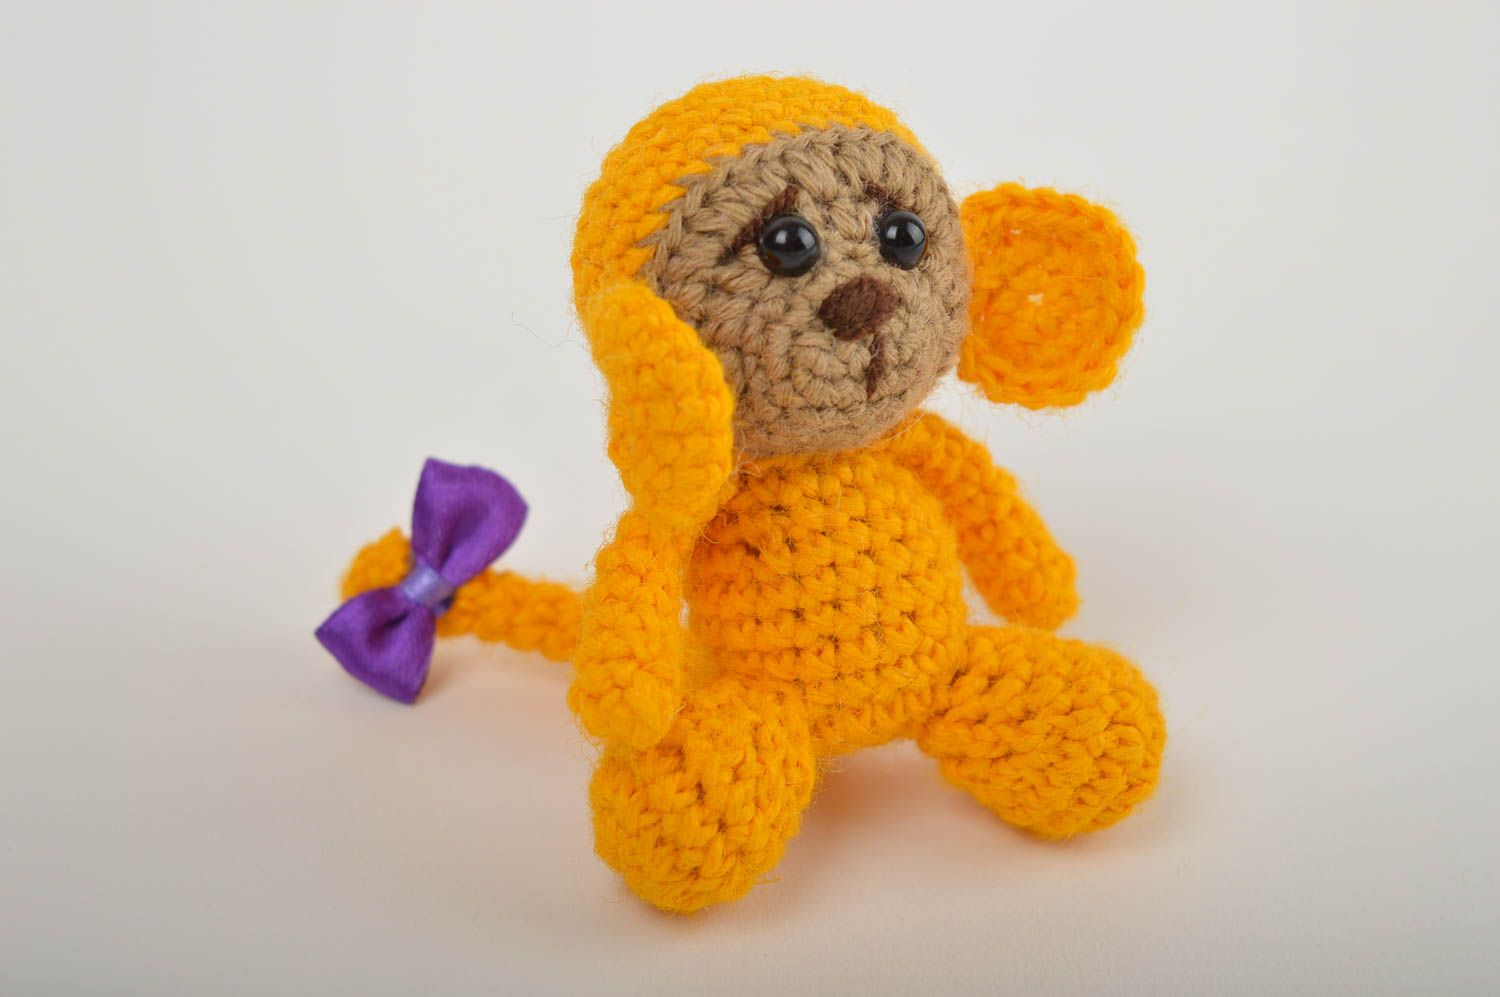 Crocheted handmade toys decorative stuffed toys for children soft toys for baby photo 2